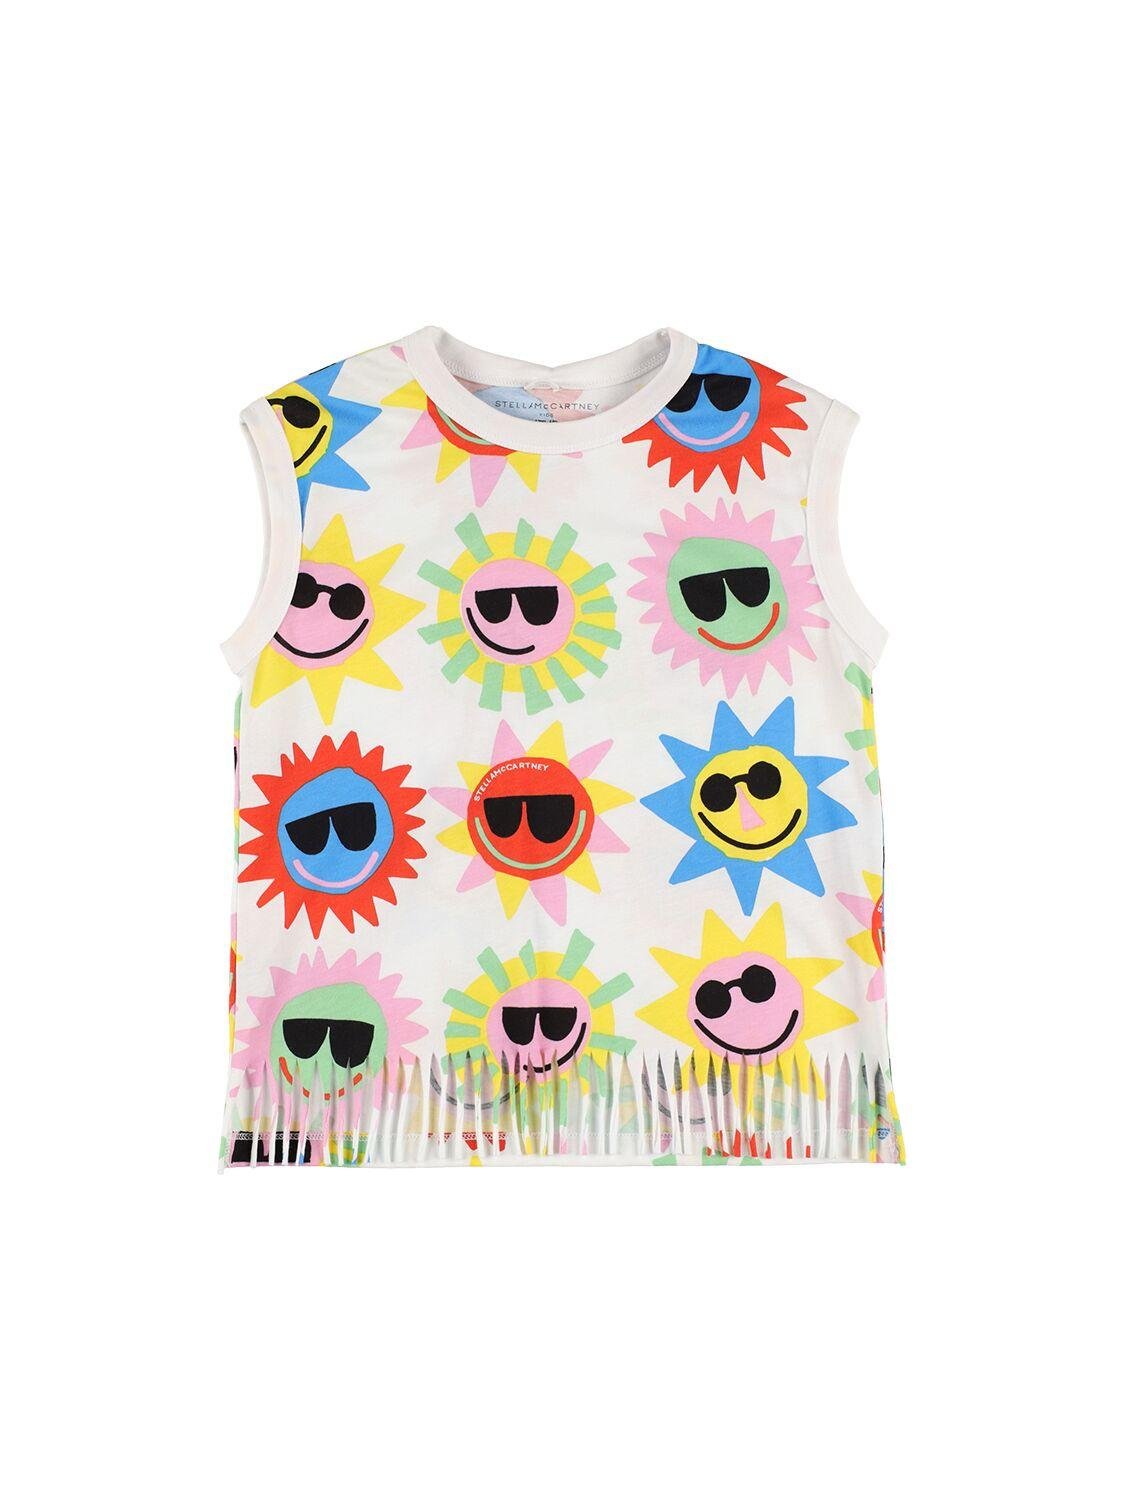 Organic Cotton Printed Top W/fringes by STELLA MCCARTNEY